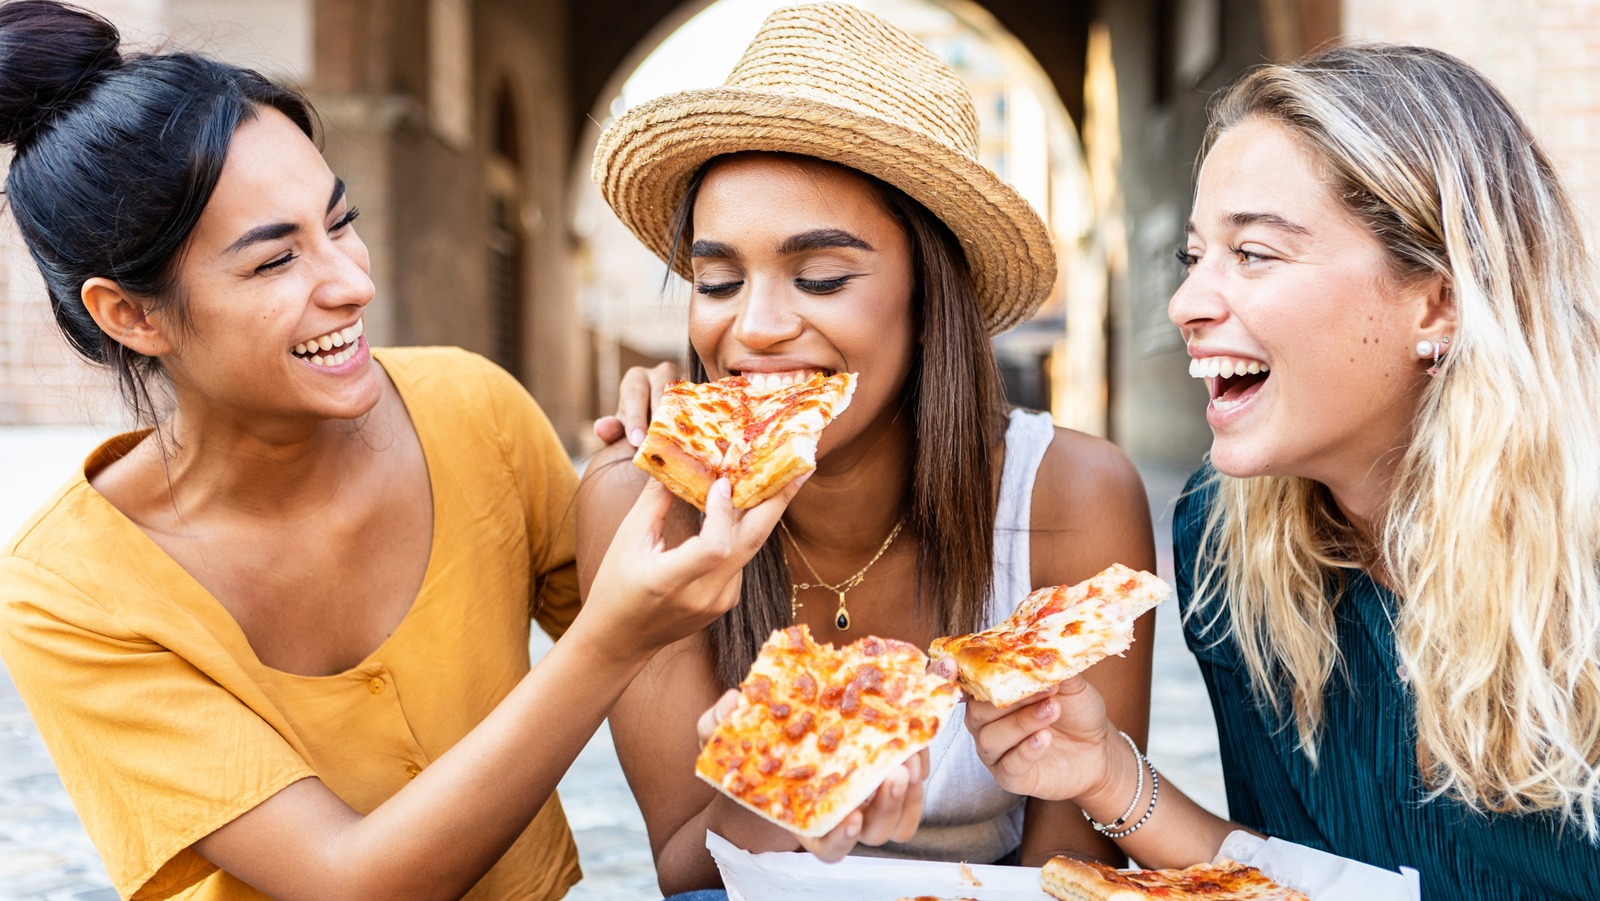 The Pizza Topping That You Should Try If You're An Aquarius